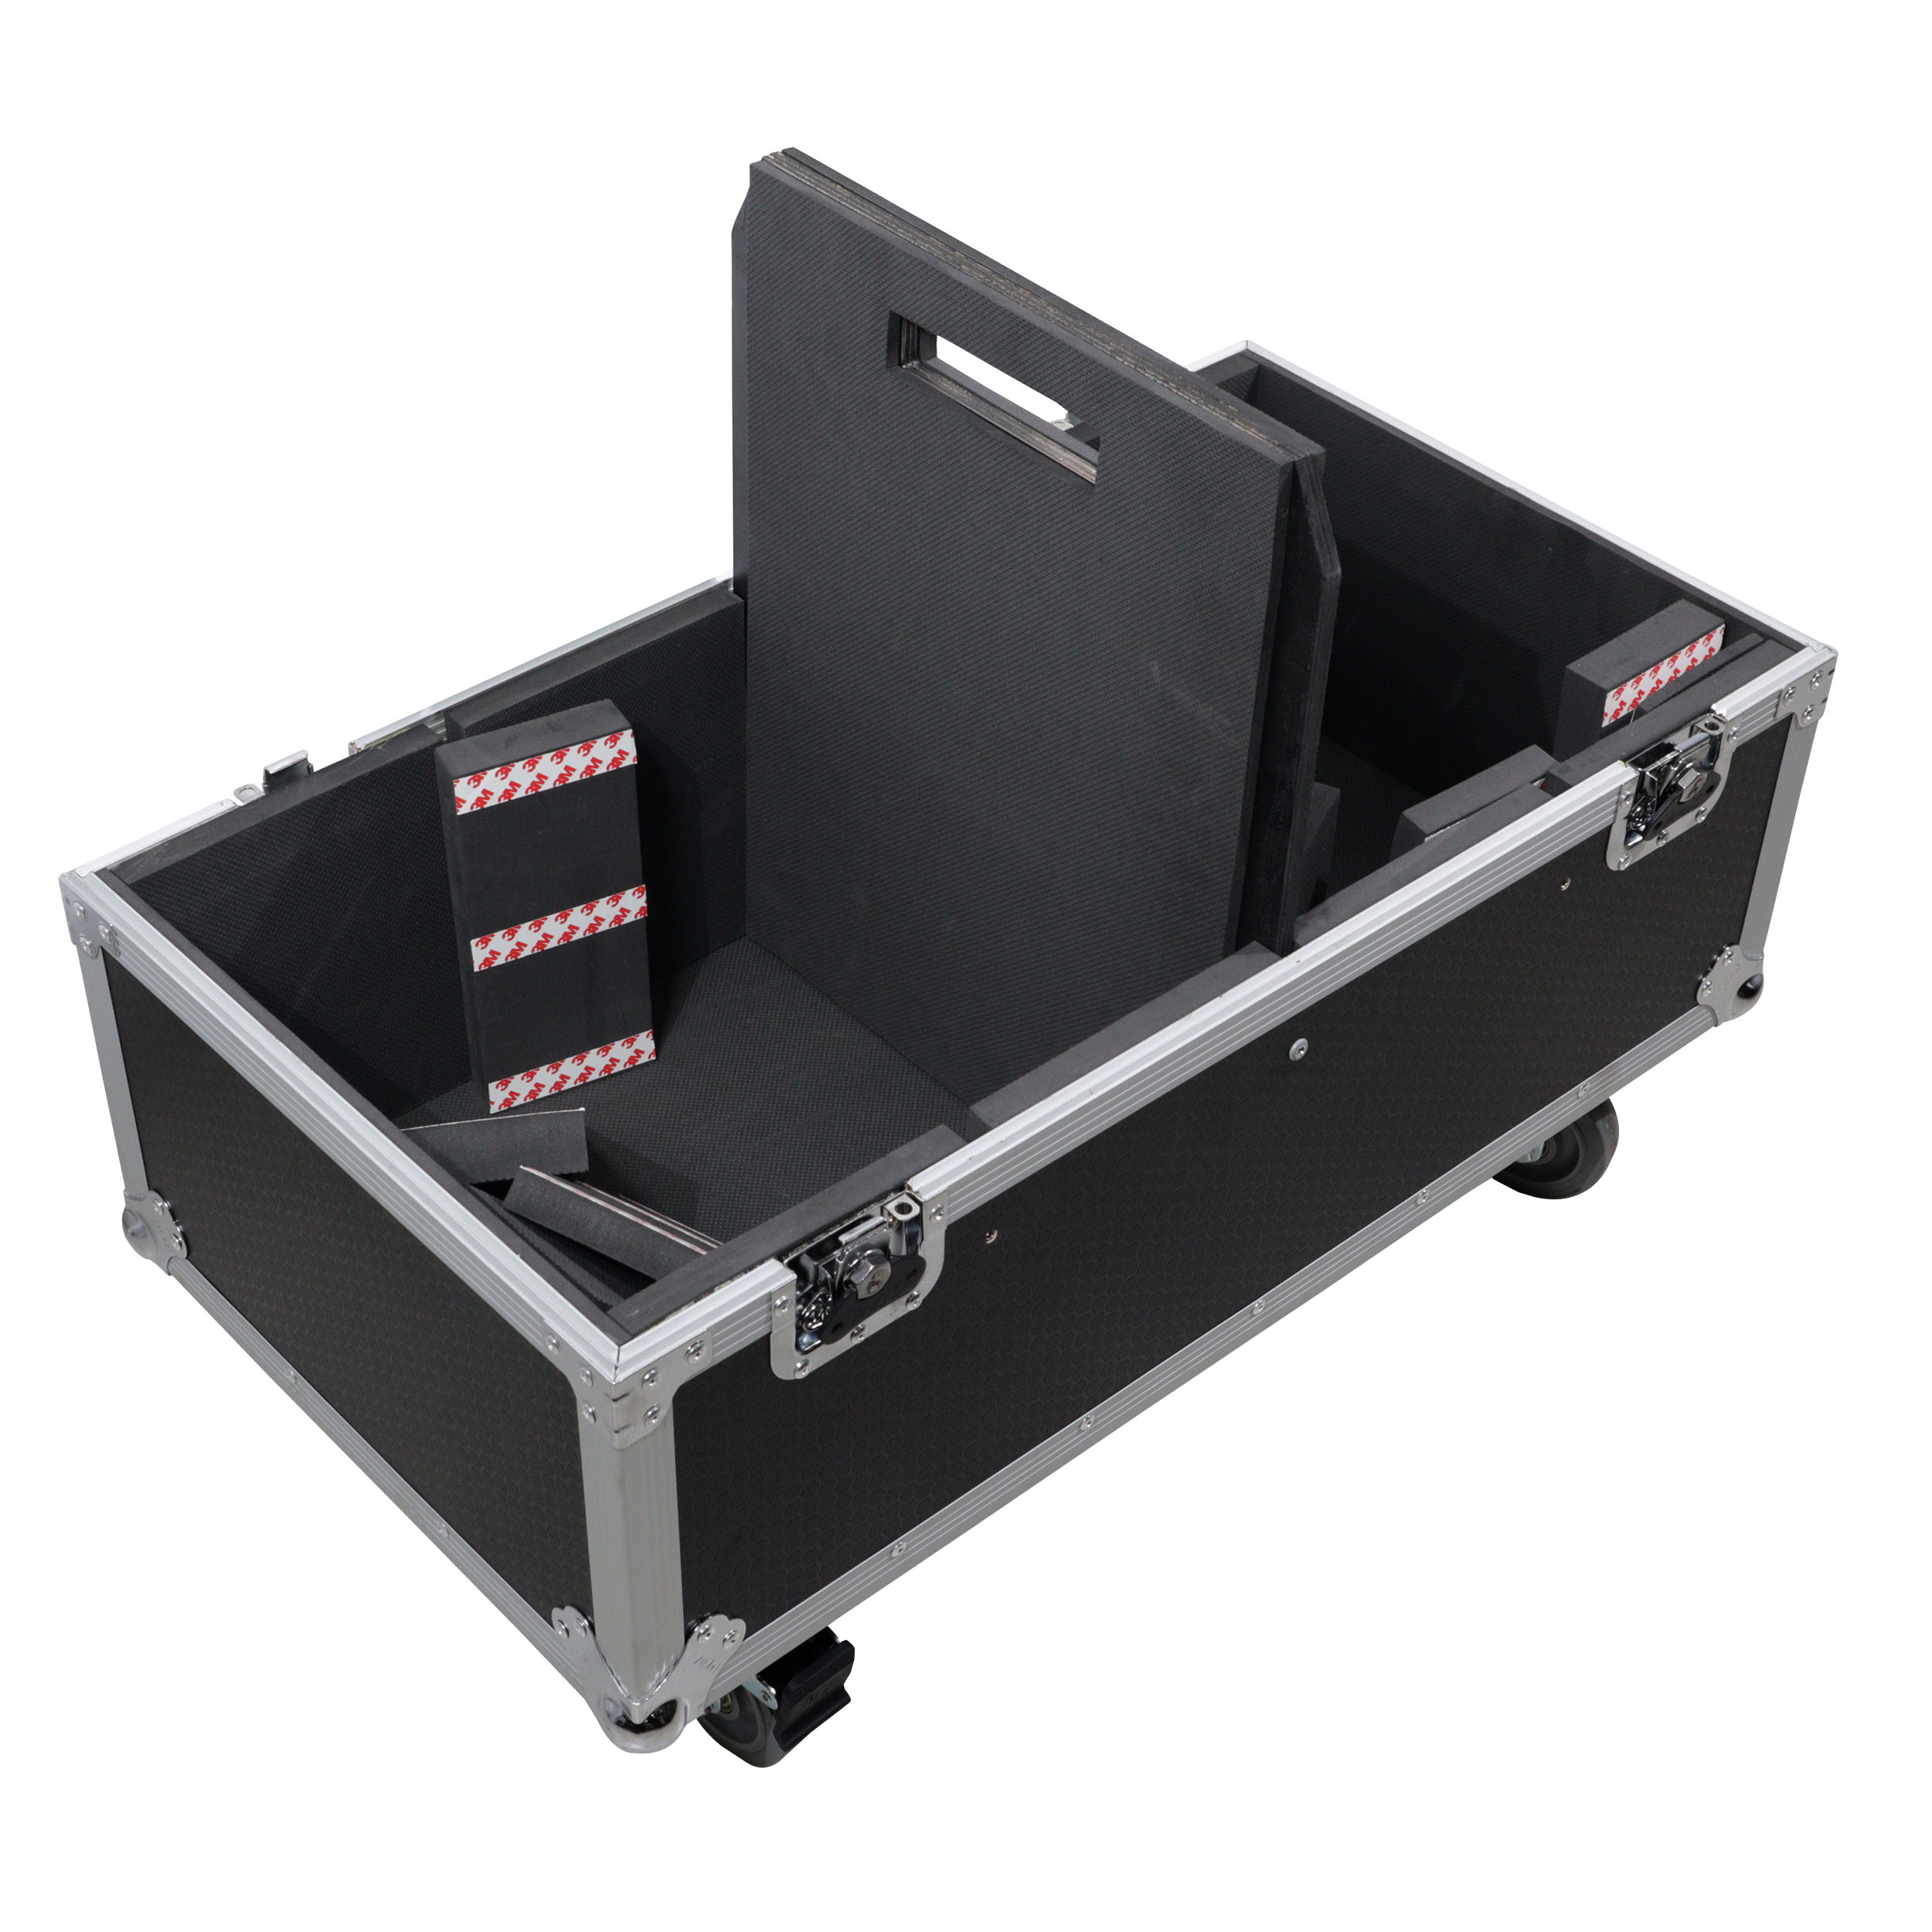 prox-xs-2x12spw-mk2--universal-ata-flight-case--for-two-12-inch-speakers.jpg